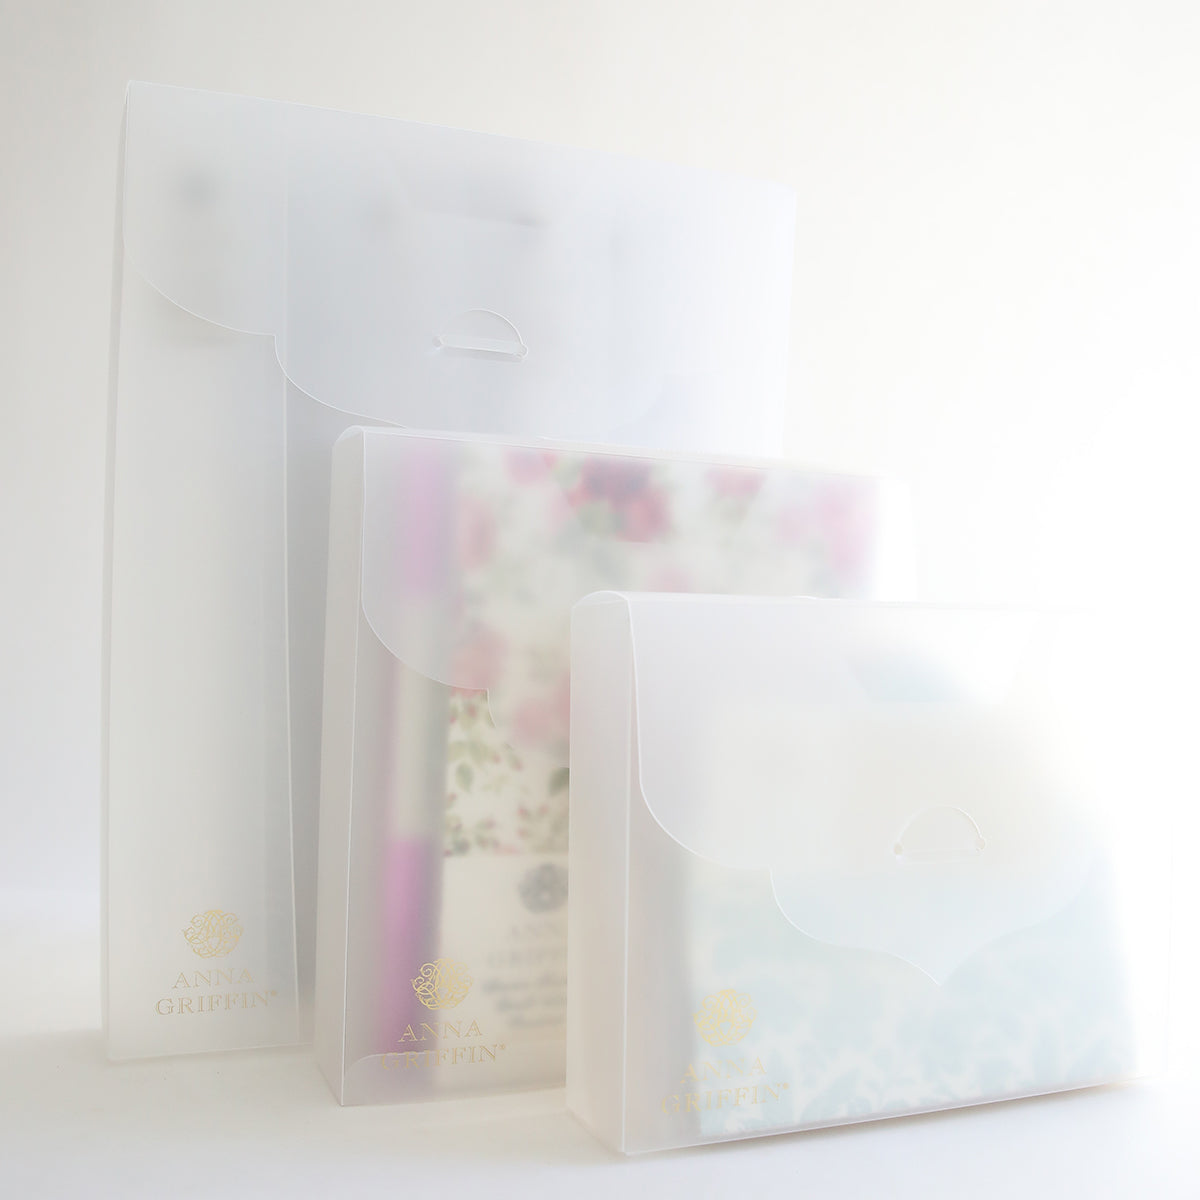 Three Frosted Craft Storage Boxes 9 count for craft storage on a white surface.